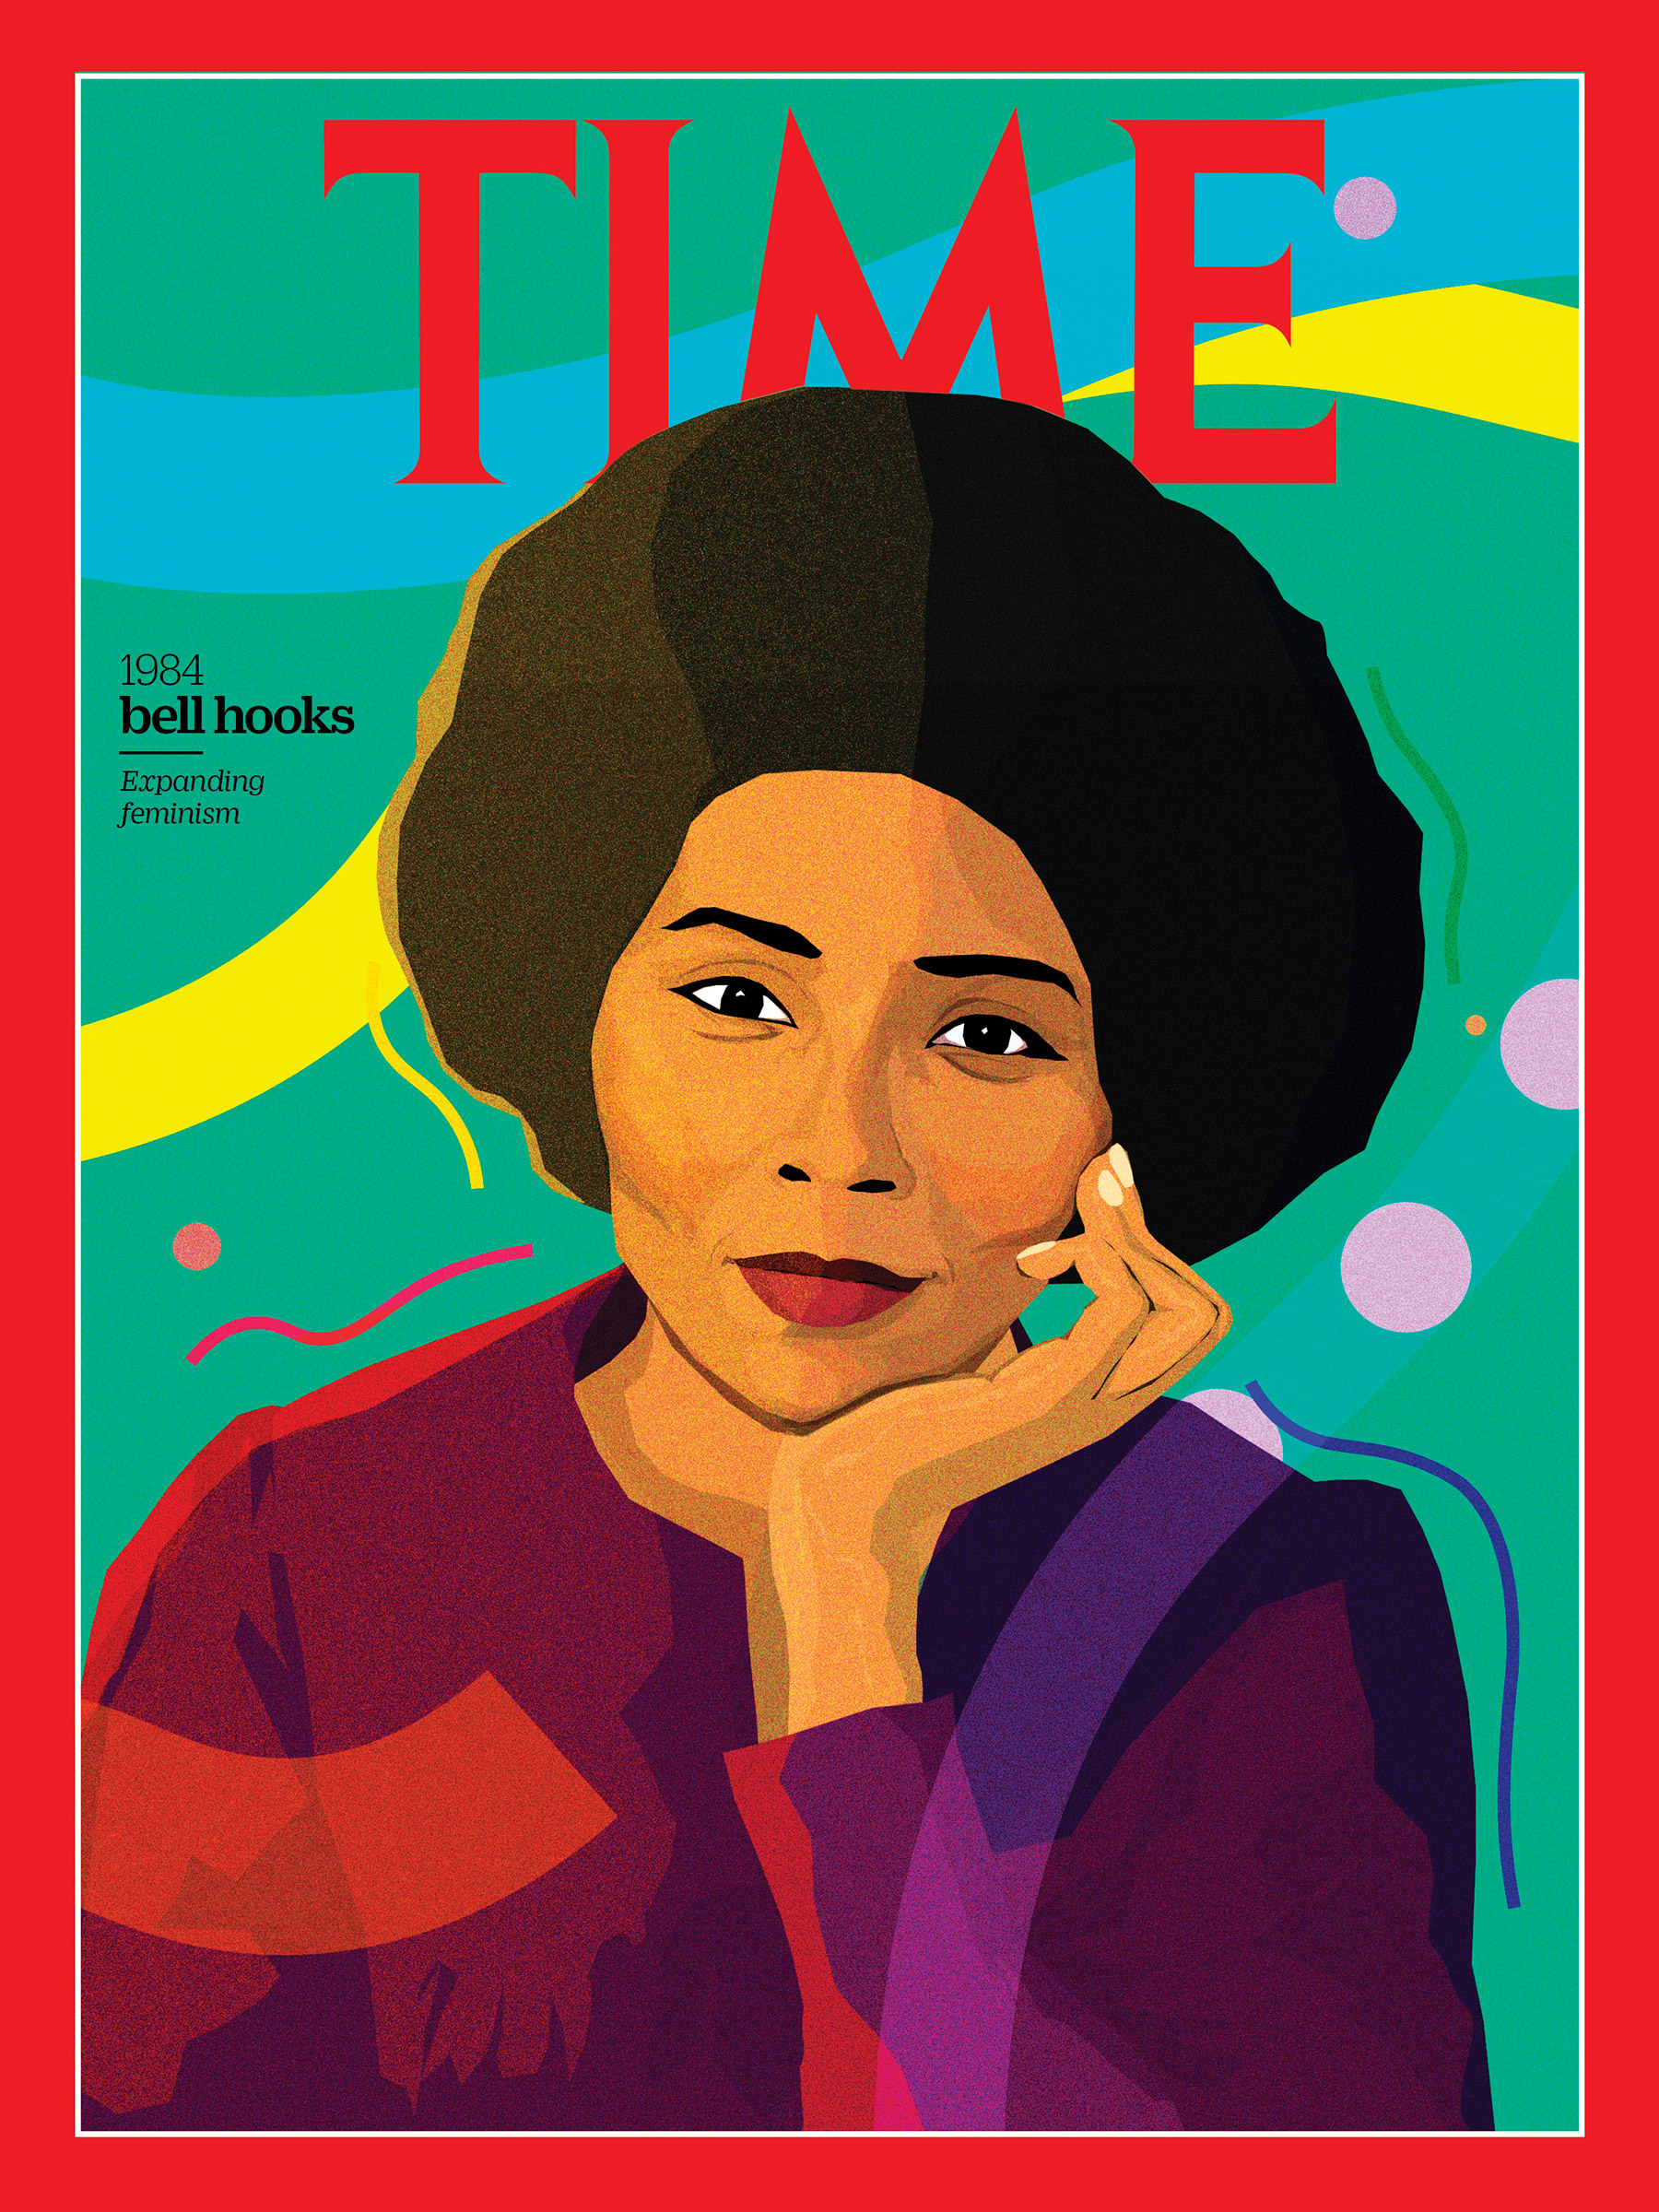 bell hooks: 100 Women of the Year | Time